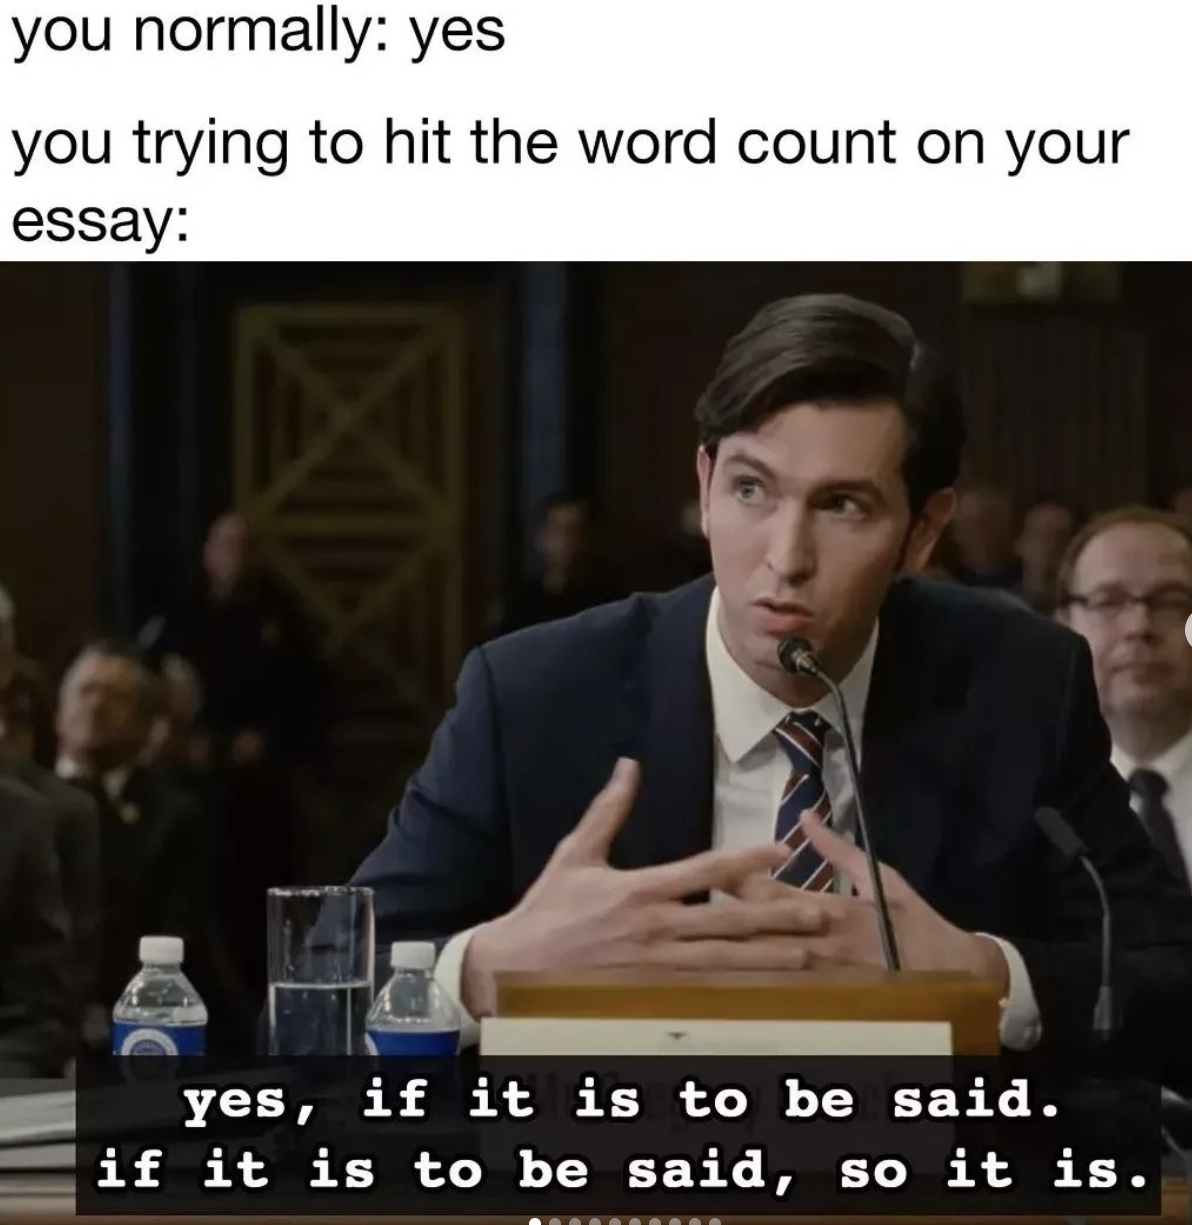 SparkNotes memes - public speaking - you normally yes you trying to hit the word count on your essay yes, if it is to be said. if it is to be said, so it is.